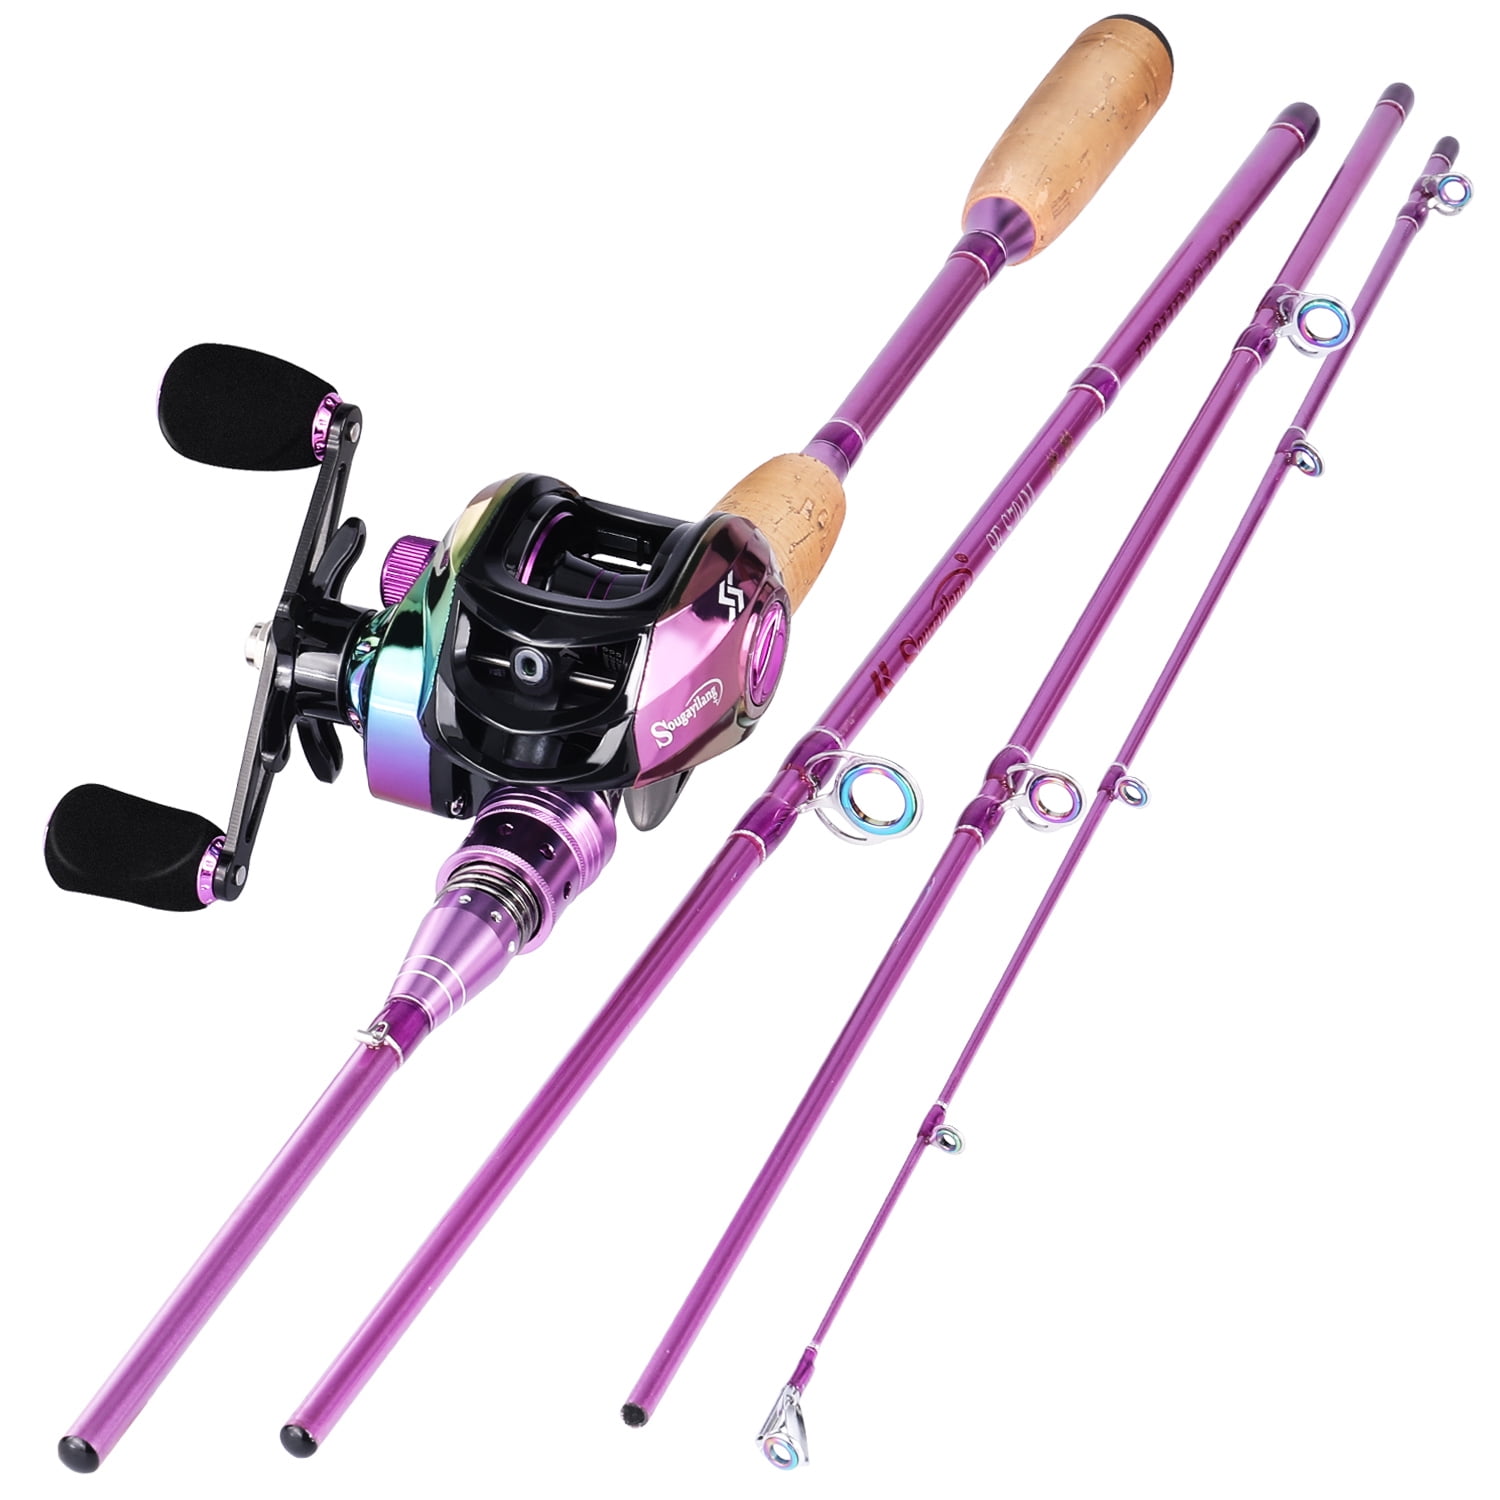 Sougayilang 6.9ft Casting Rod and Reel Baitcast Combo 4 Piece Casting Fishing  Pole with Baitcaster Reel 